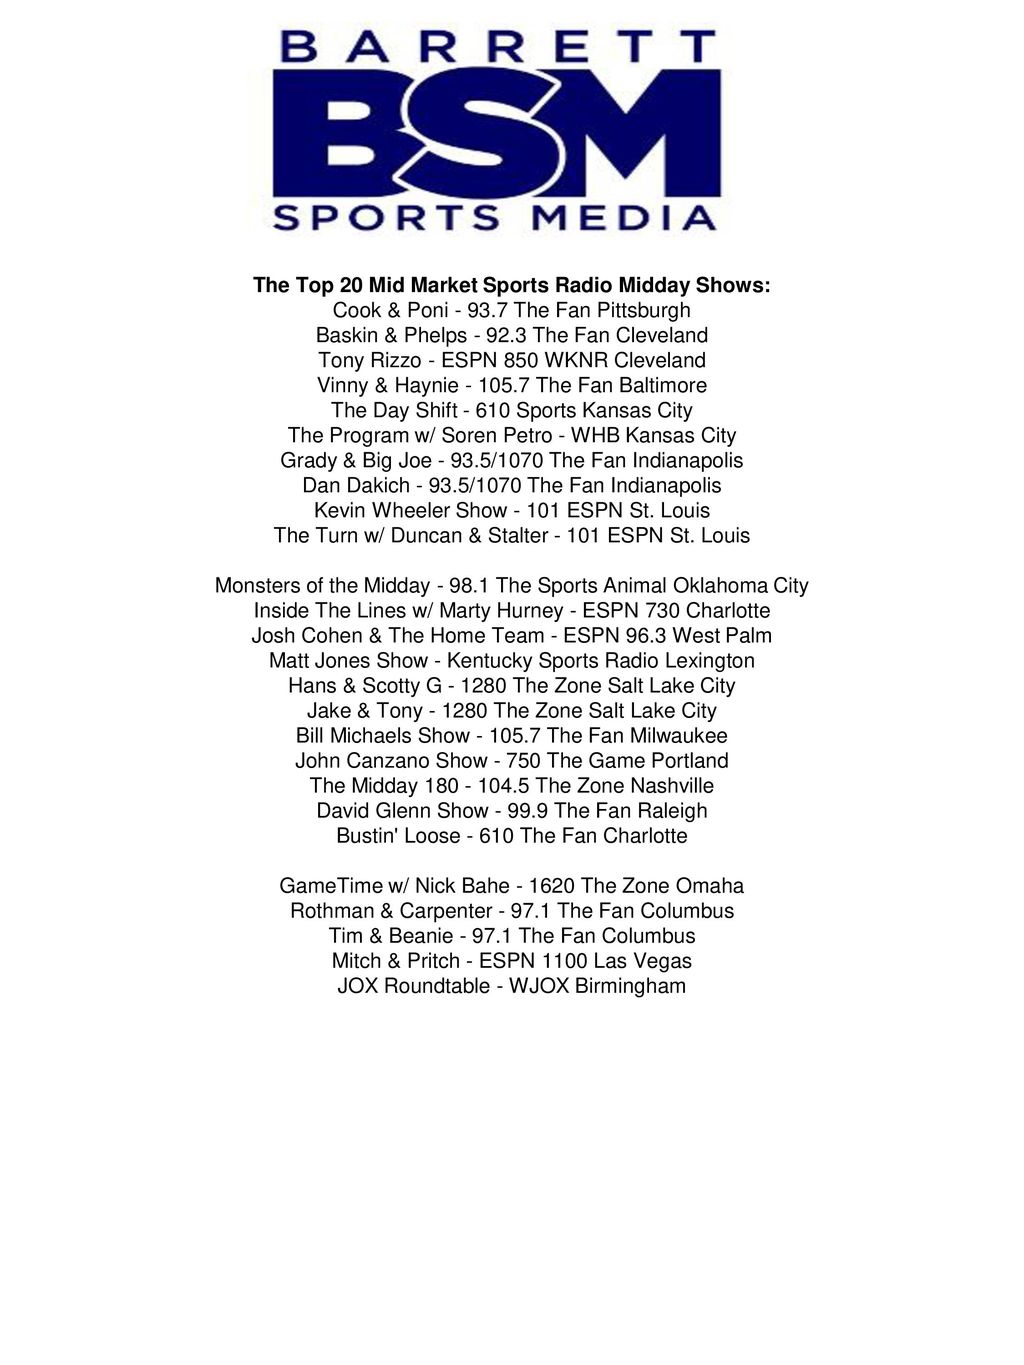 The Top 20 Major Market Sports Radio PD's - ppt video online download